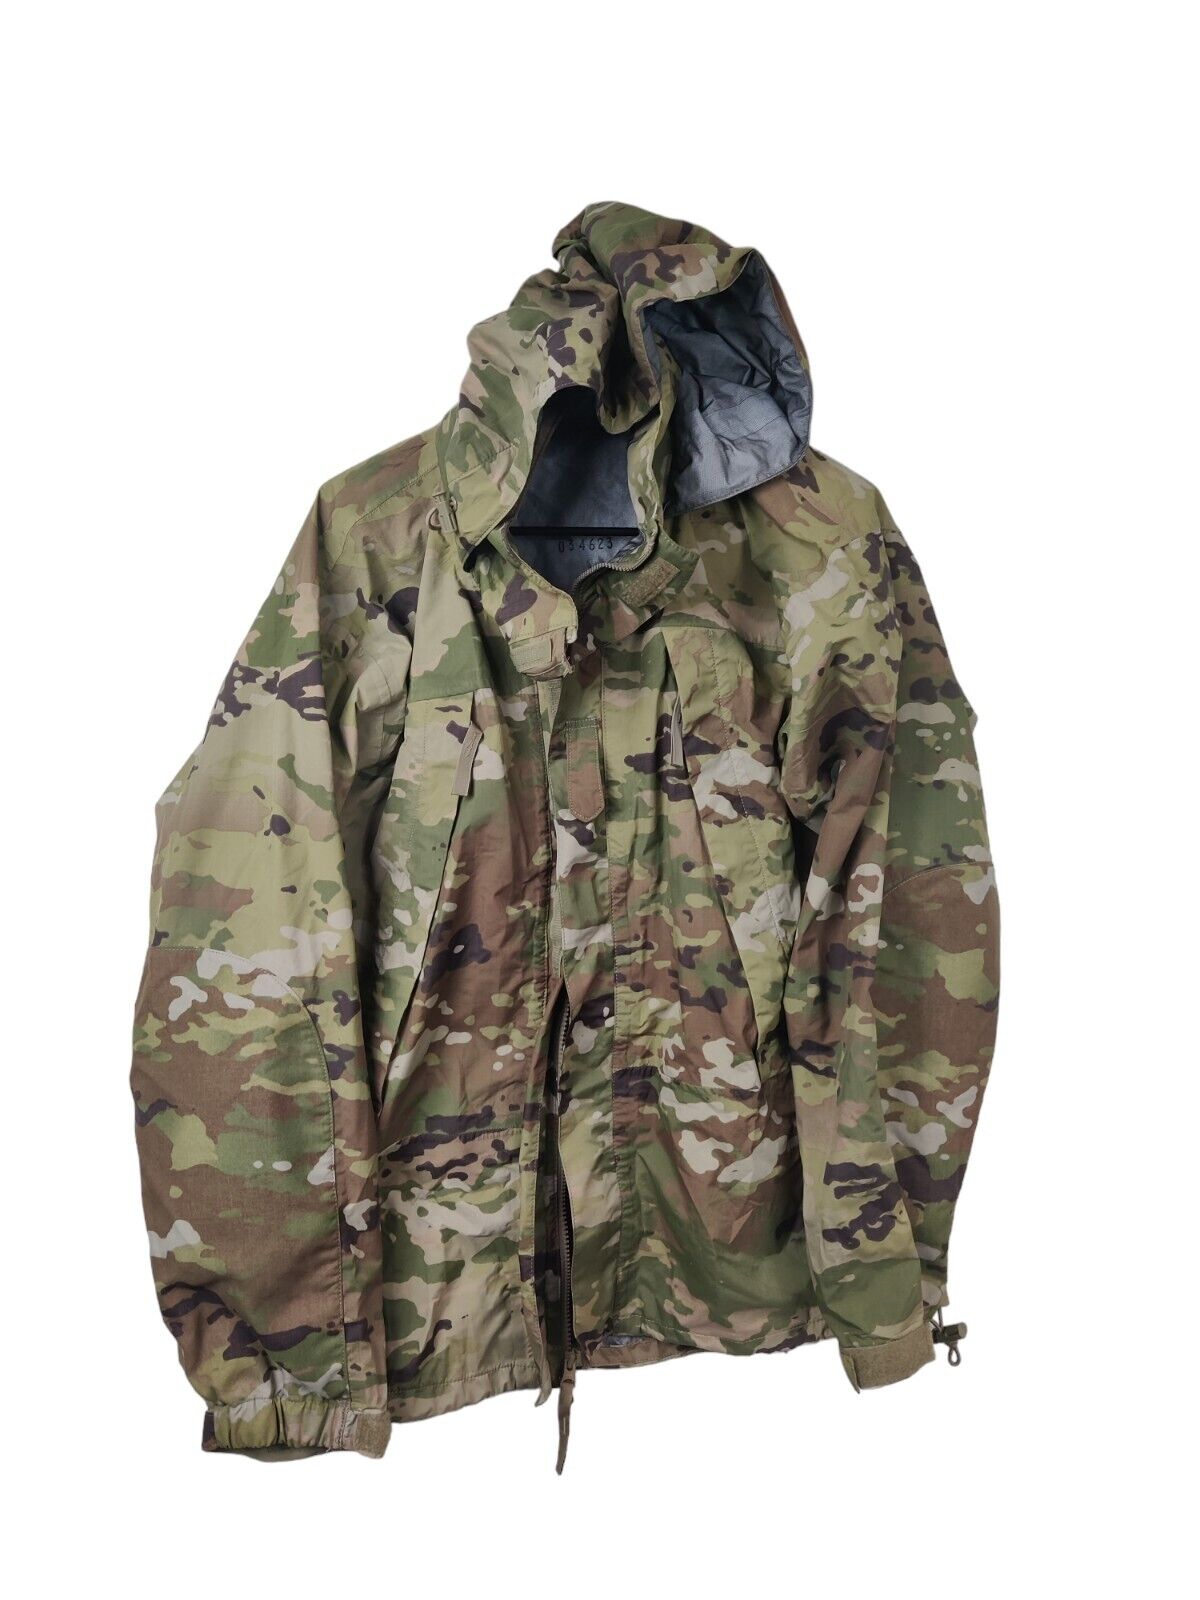 Extreme Cold Wet Weather Gen III Layer 6 Camo Military Jacket Men's Size XS Reg 